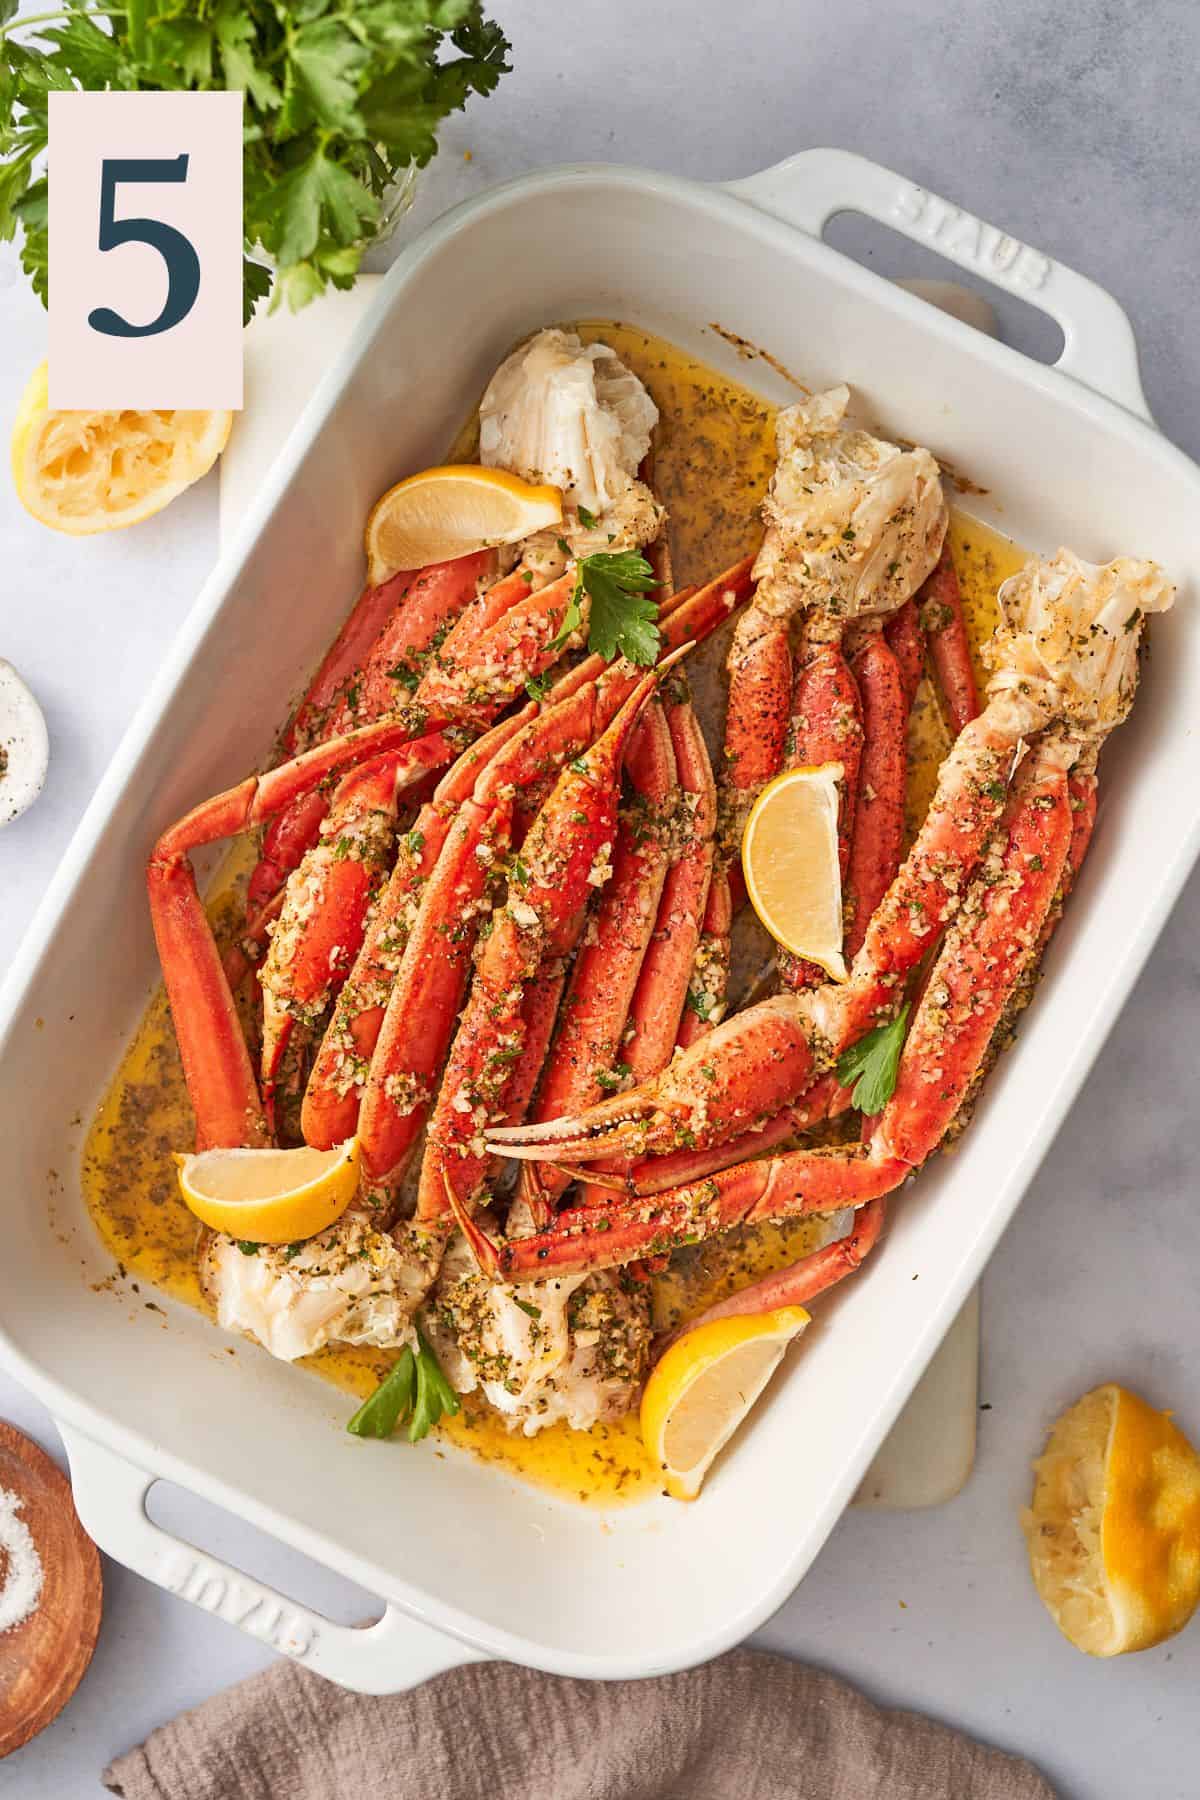 staub casserole dish with baked crab legs smothered in garlic herb dipping sauce, with lemon wedges.